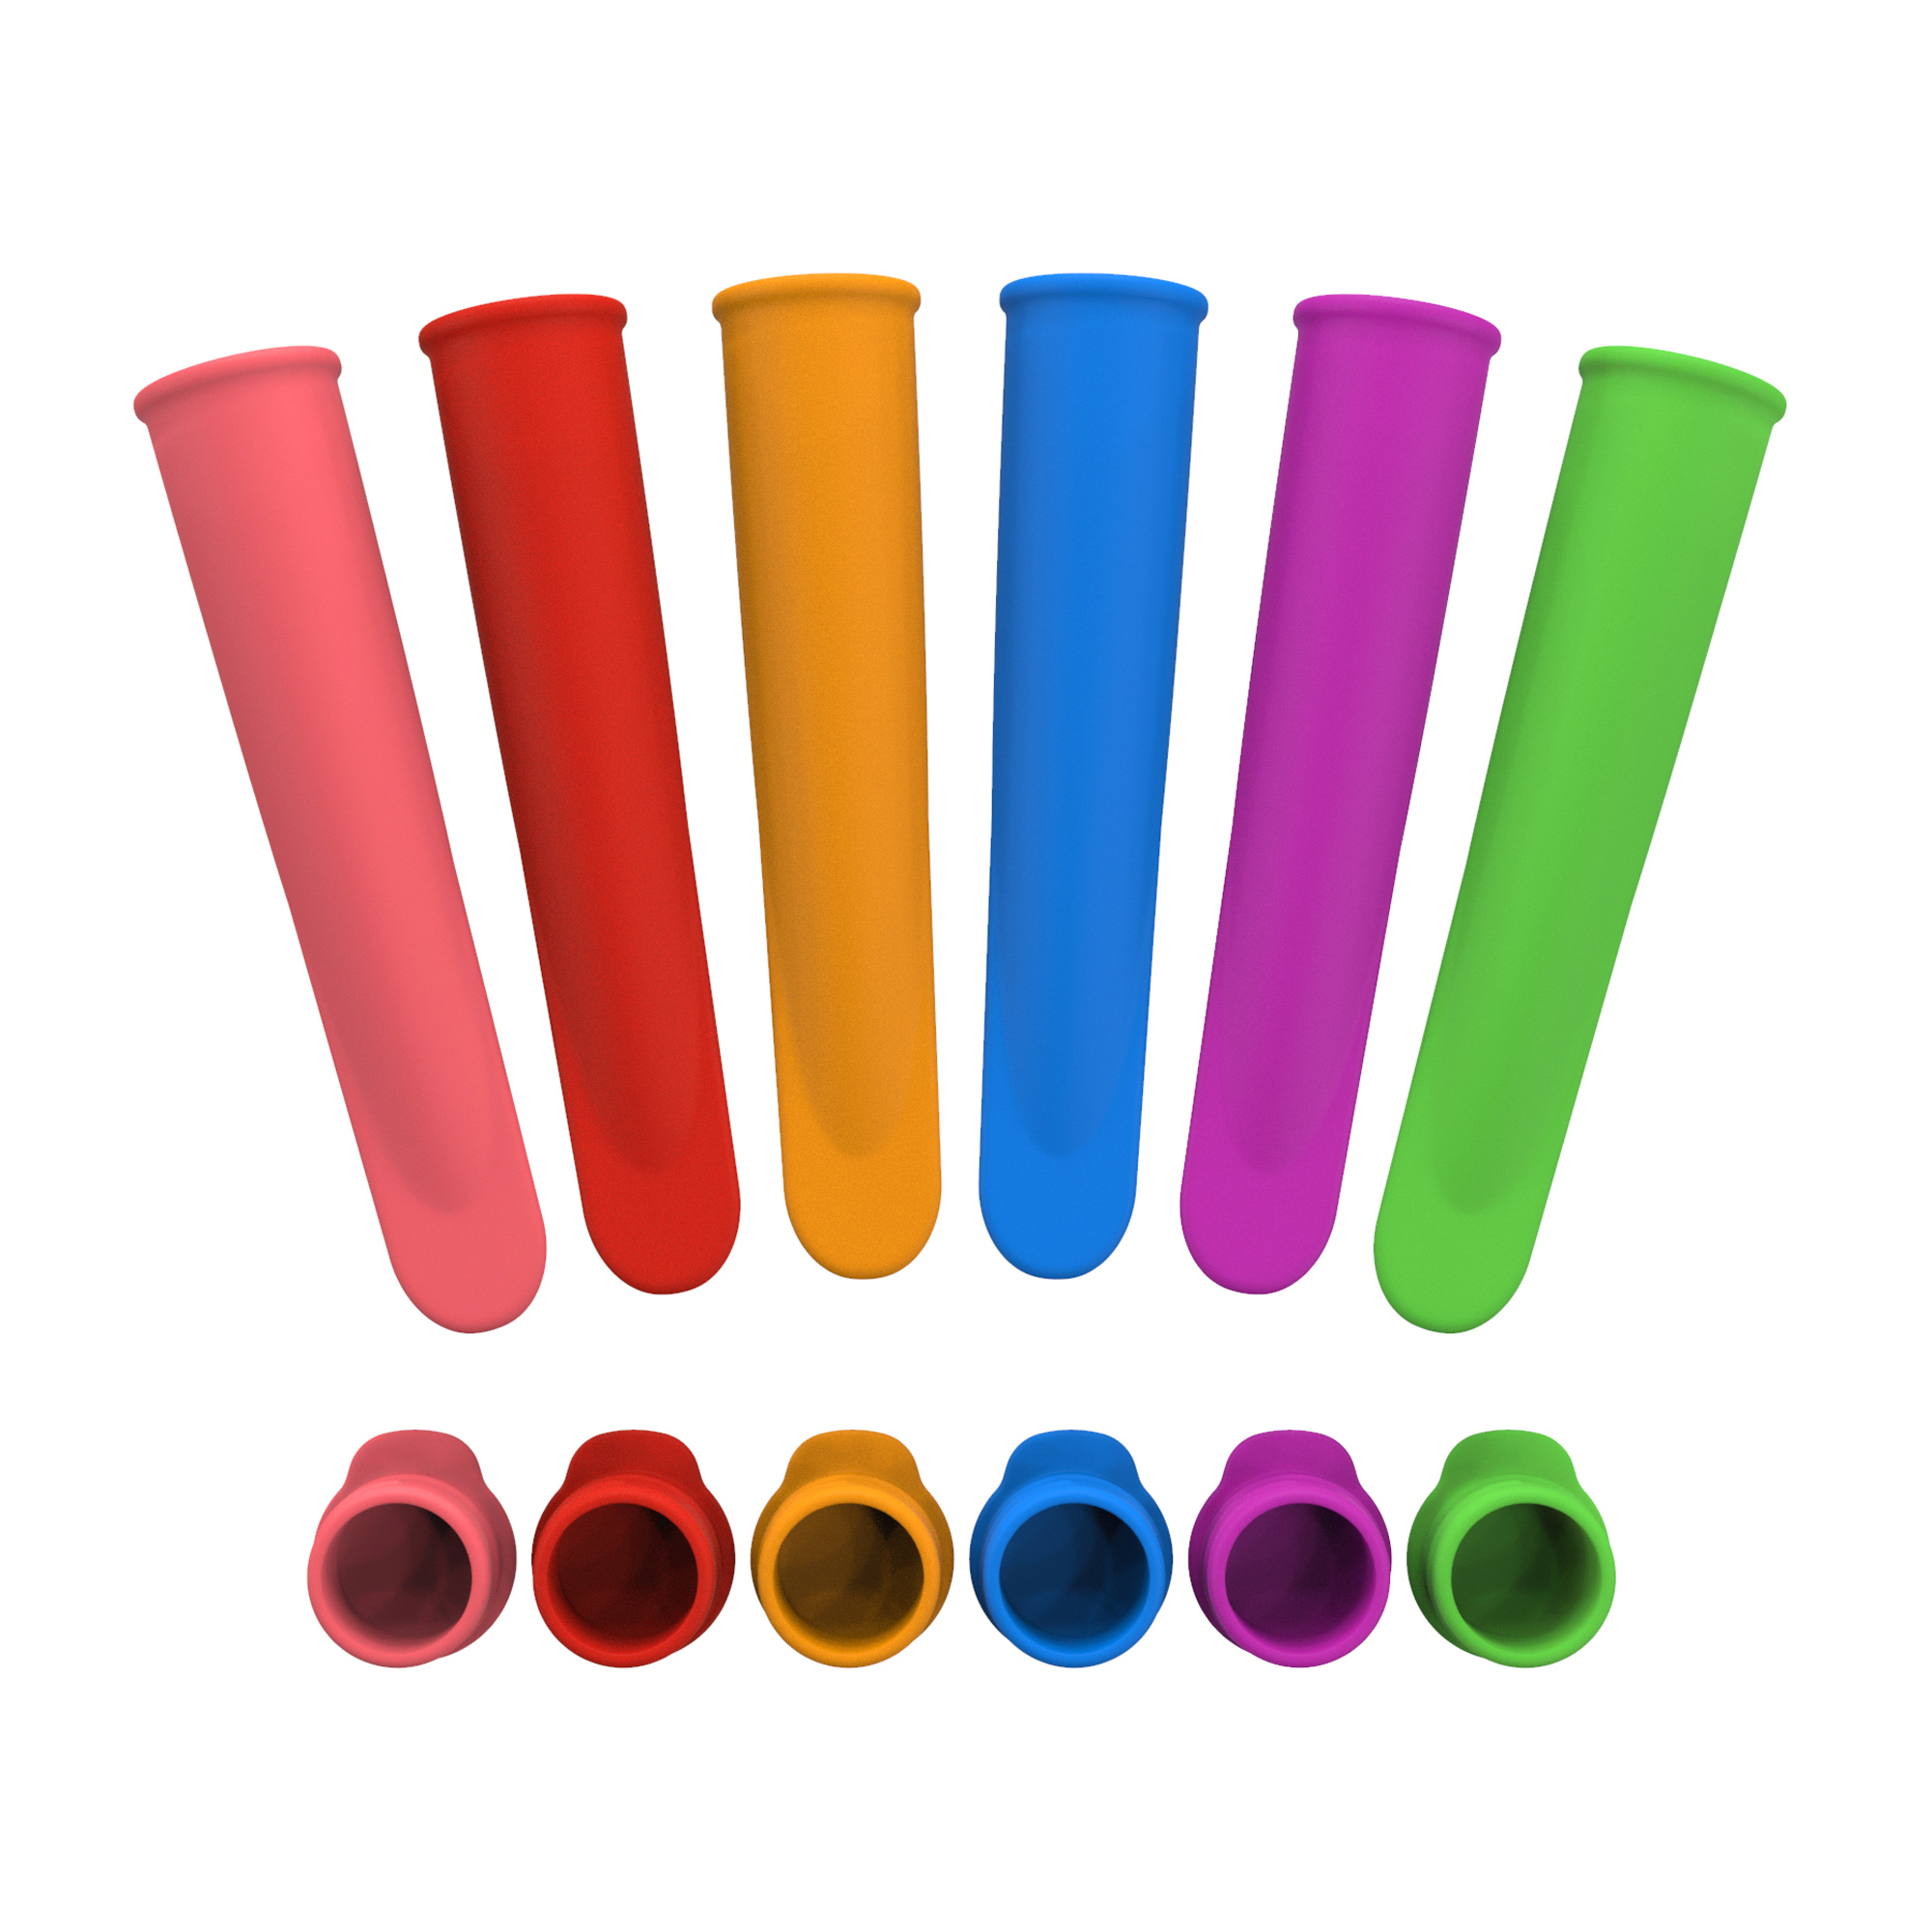 Silicone Ice Pop Dessert Makers 6 Tubes for Homemade Ice Treats No Preservative